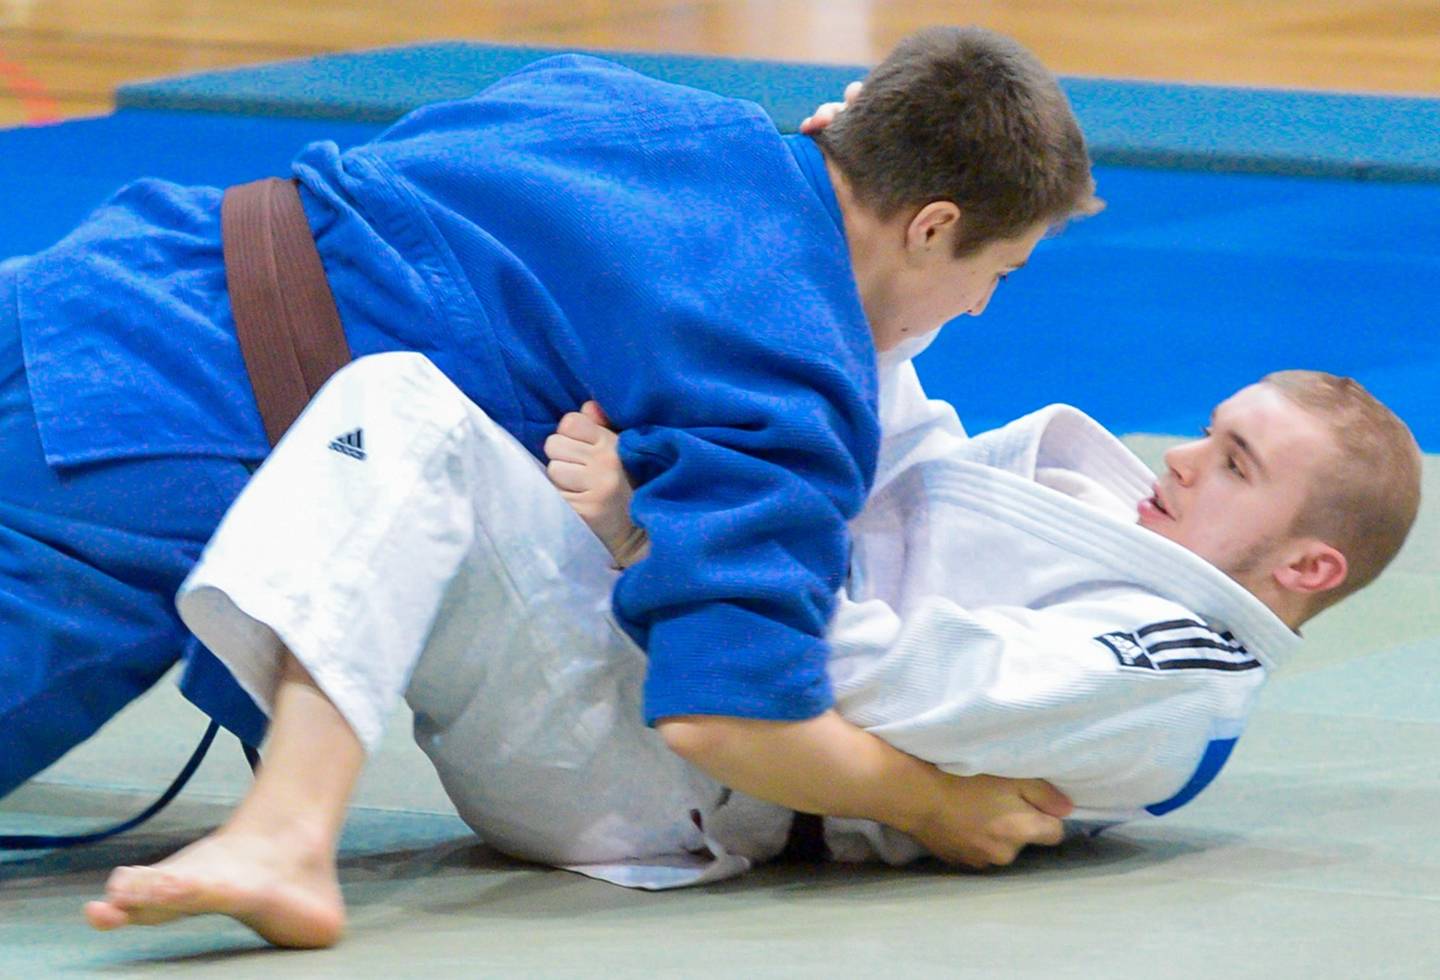 Connah Anders playing judo